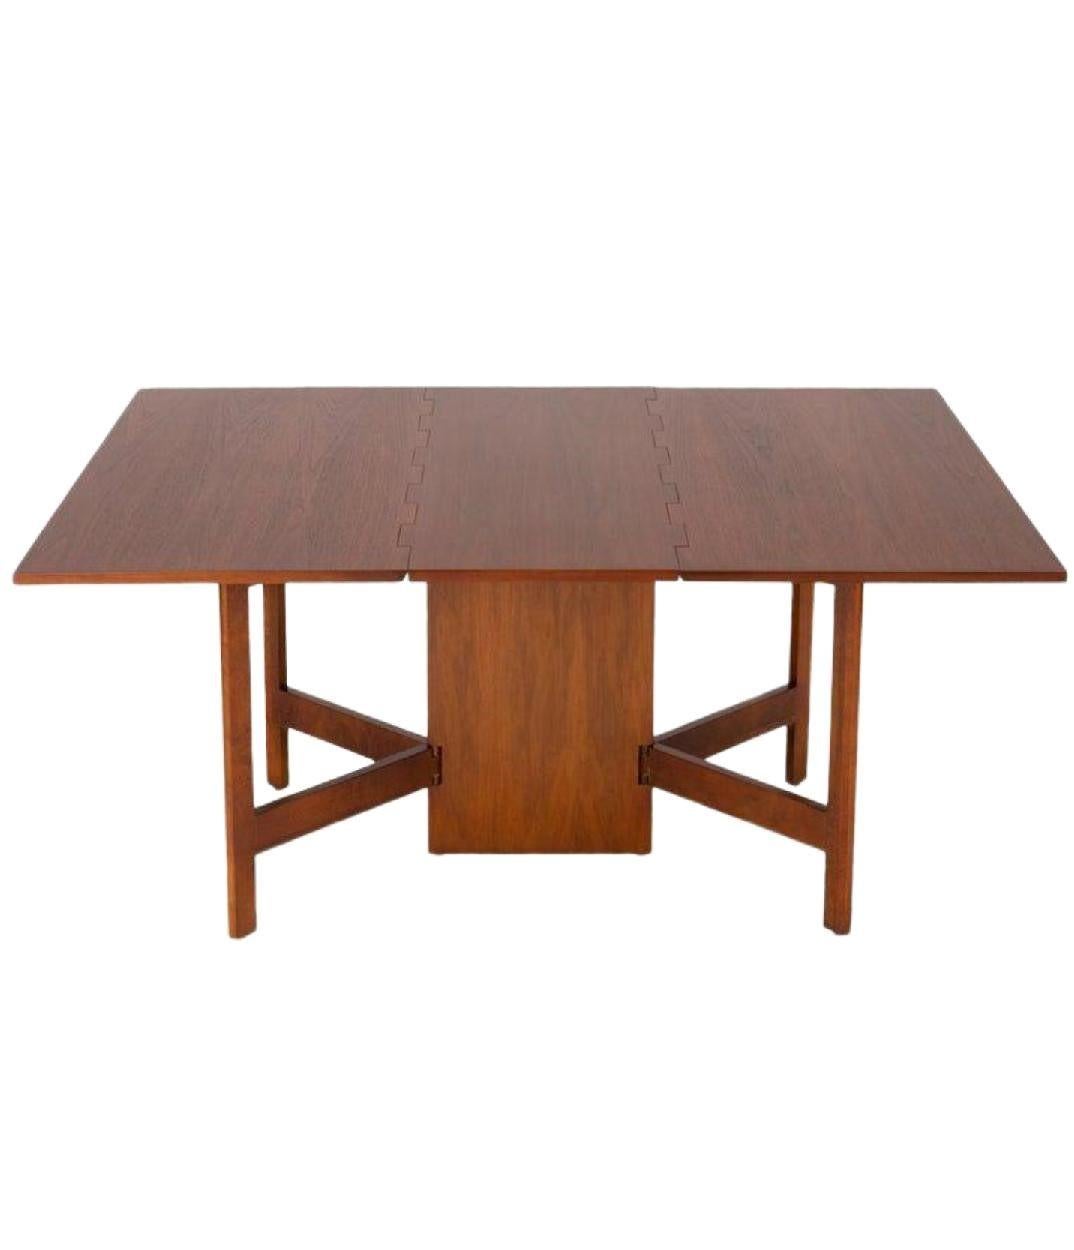 1950s Mid Century George Nelson for Herman Miller gate leg dining table

George Nelson Vintage 1950s Walnut Gate Leg Dining Table By Herman Miller.

George Nelson Designed This Table For Herman Miller In The 1950s With A Special Wide Wood Hinge